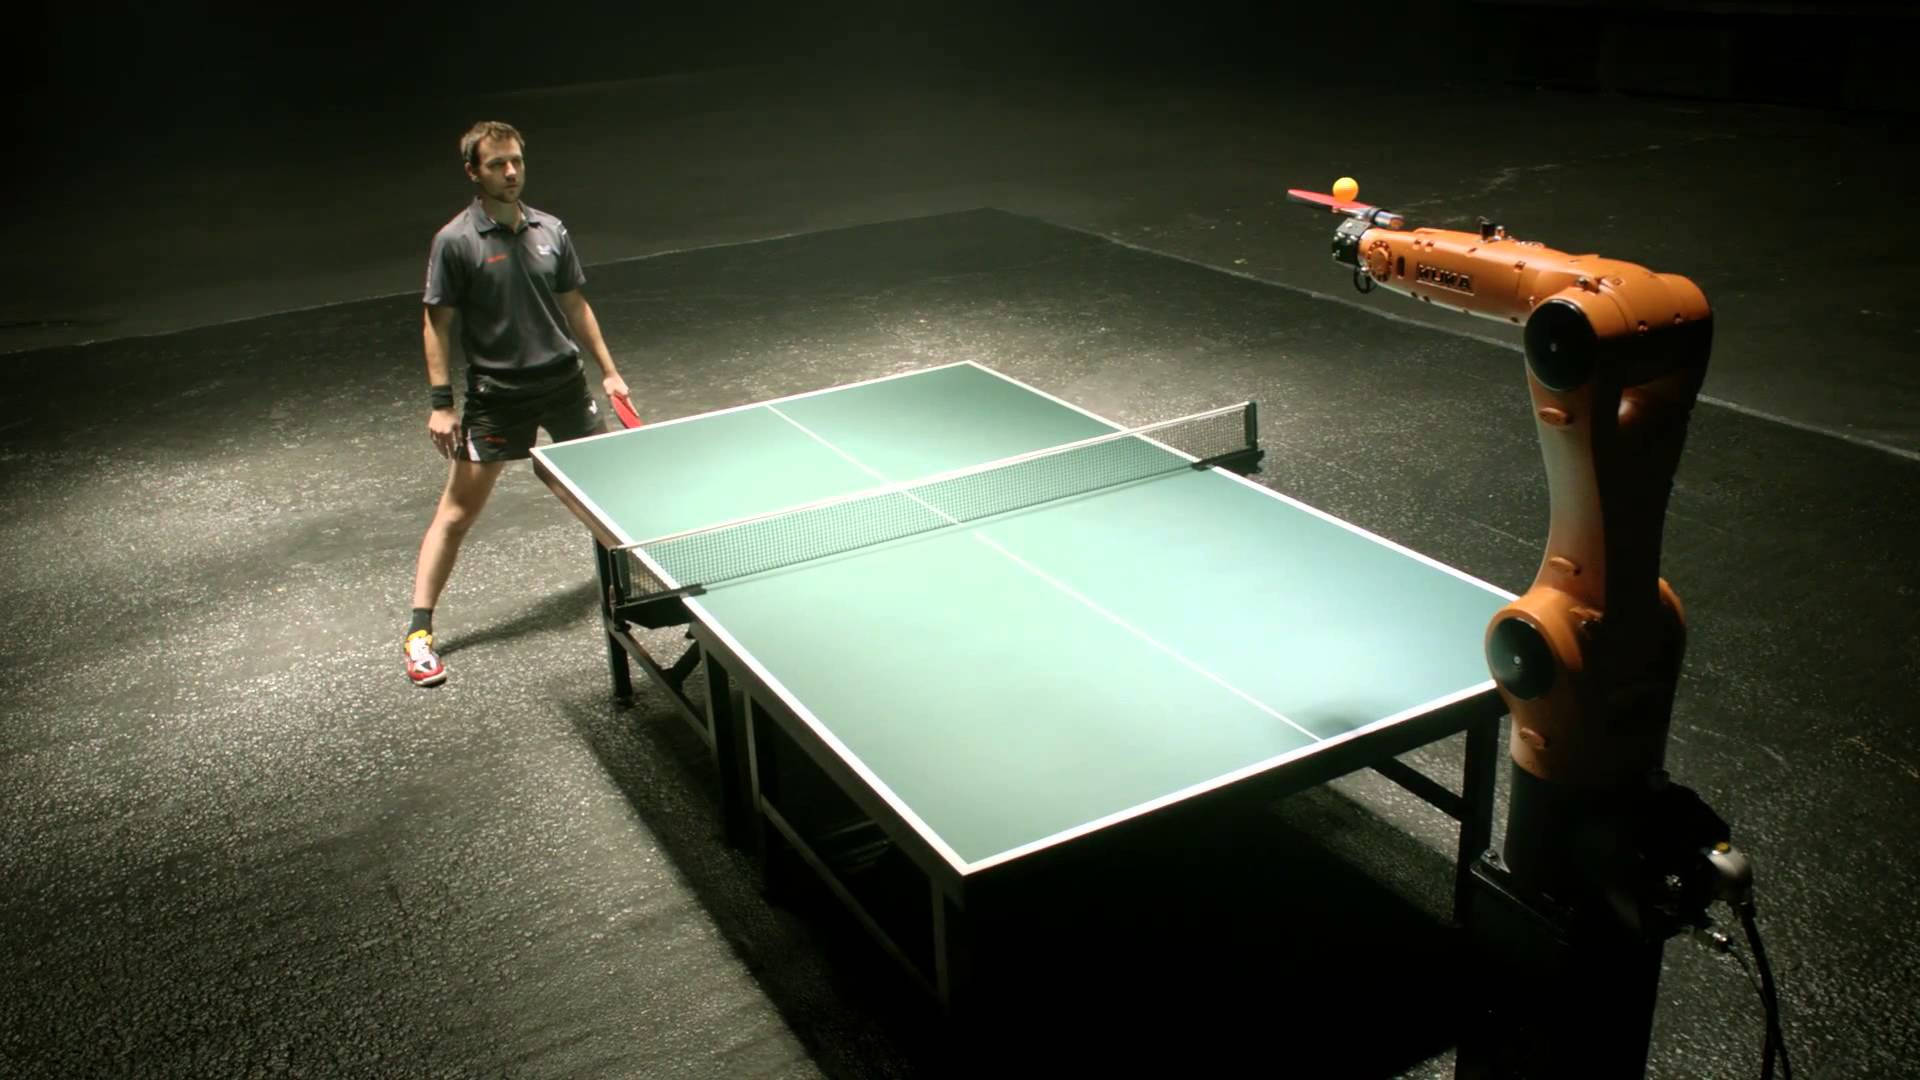 Advanced Robotic Table Tennis Player Background